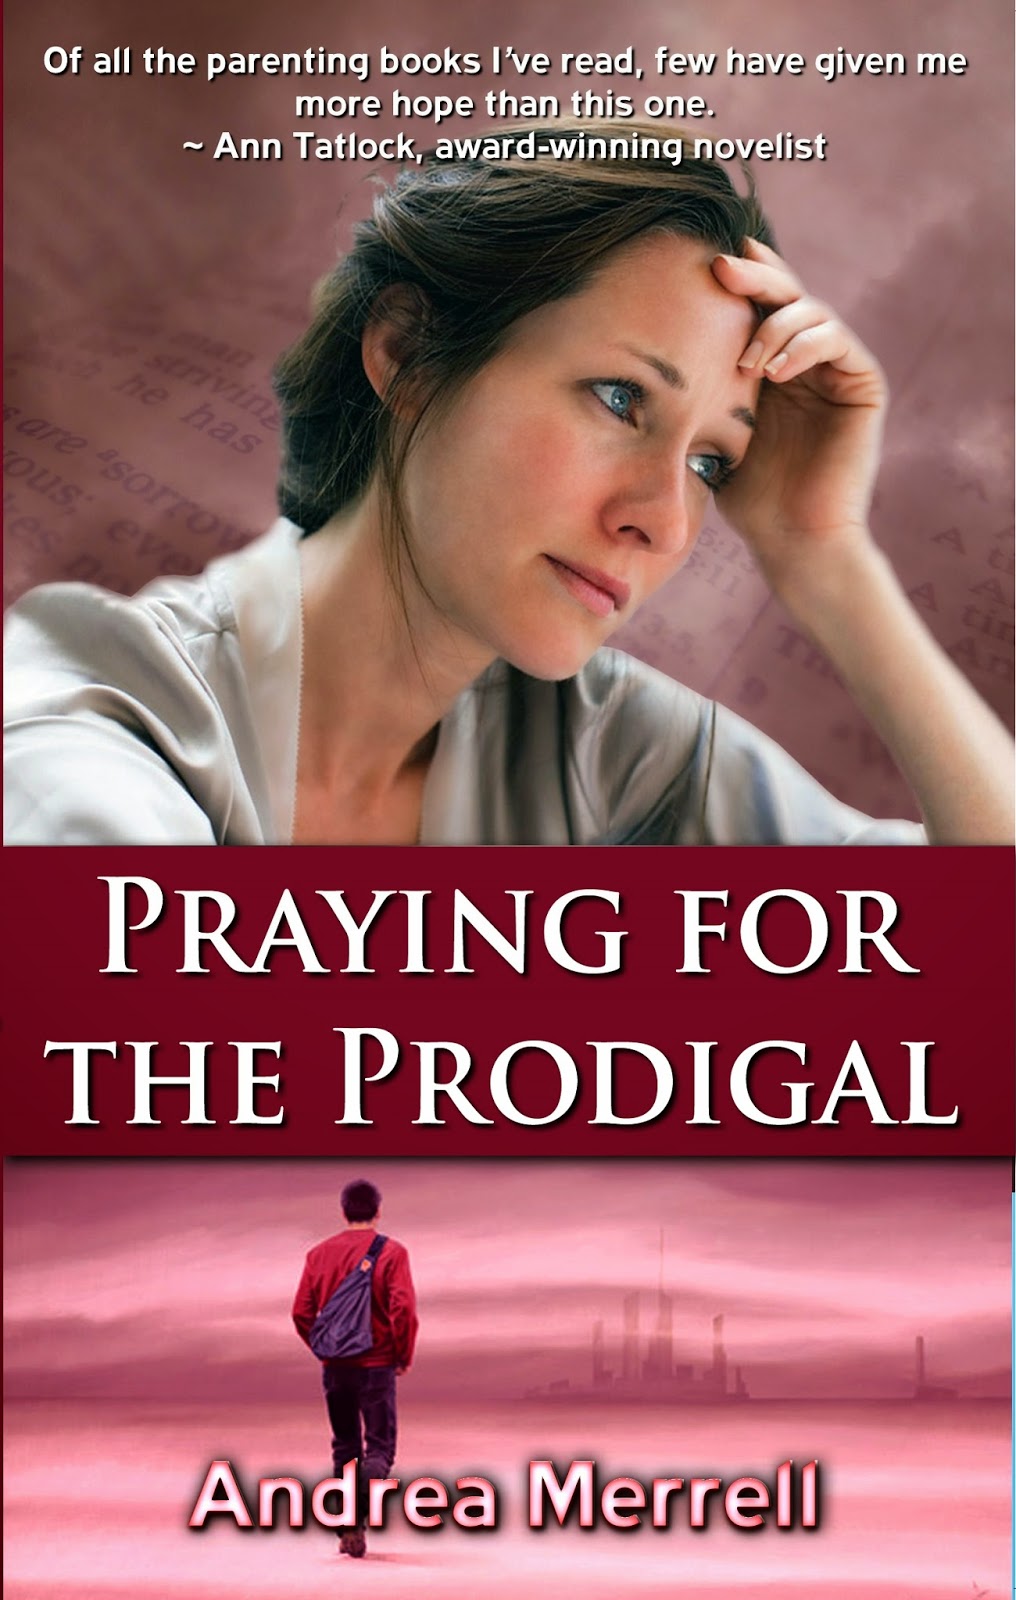 Book Give-Away: “Praying for the Prodigal”